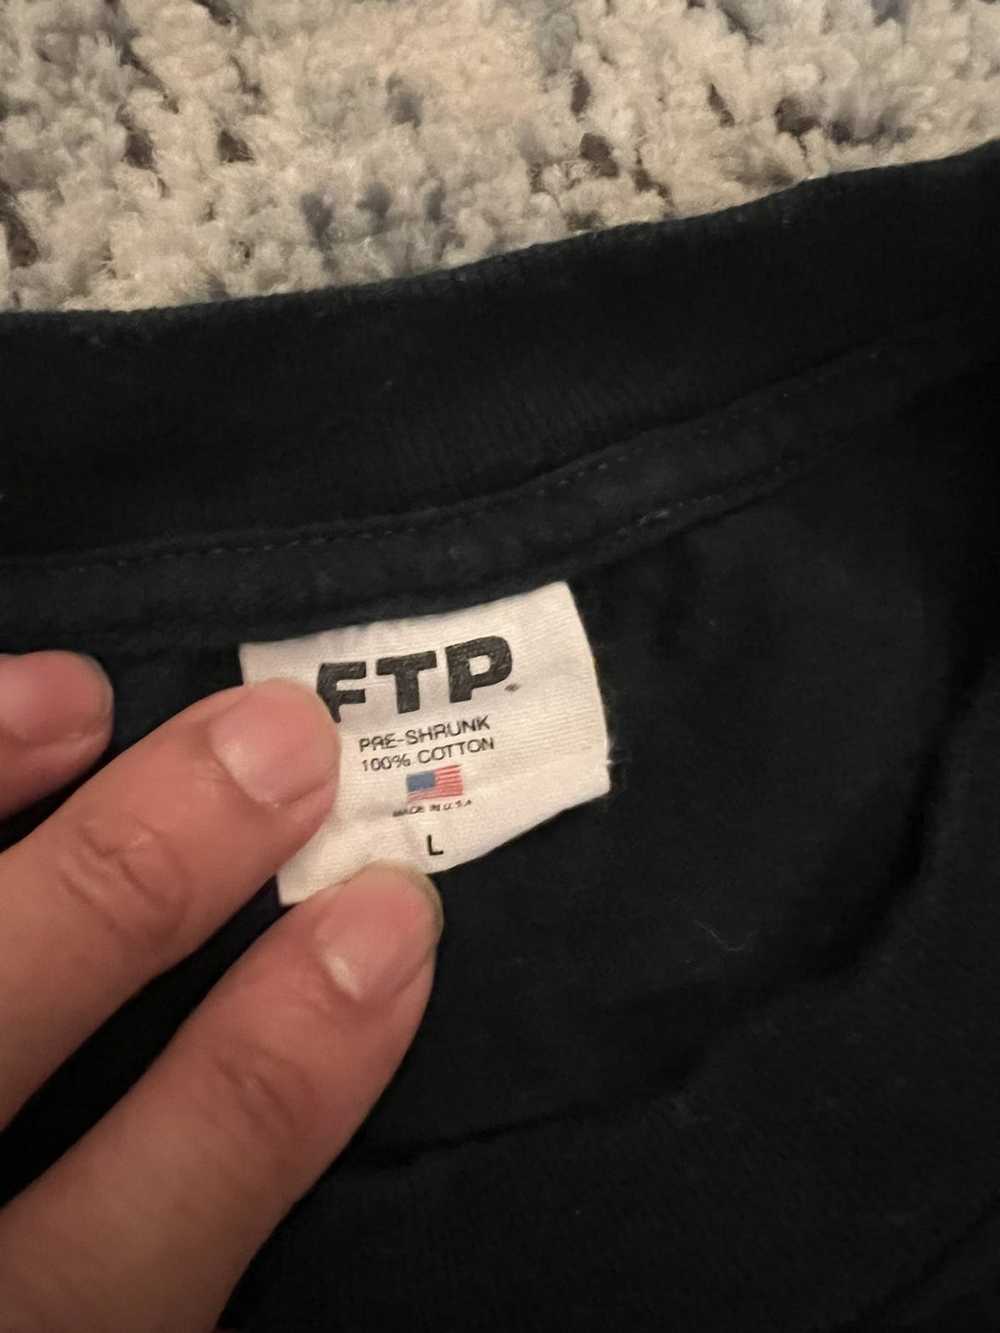 Fuck The Population Ftp bling tshirt - image 2